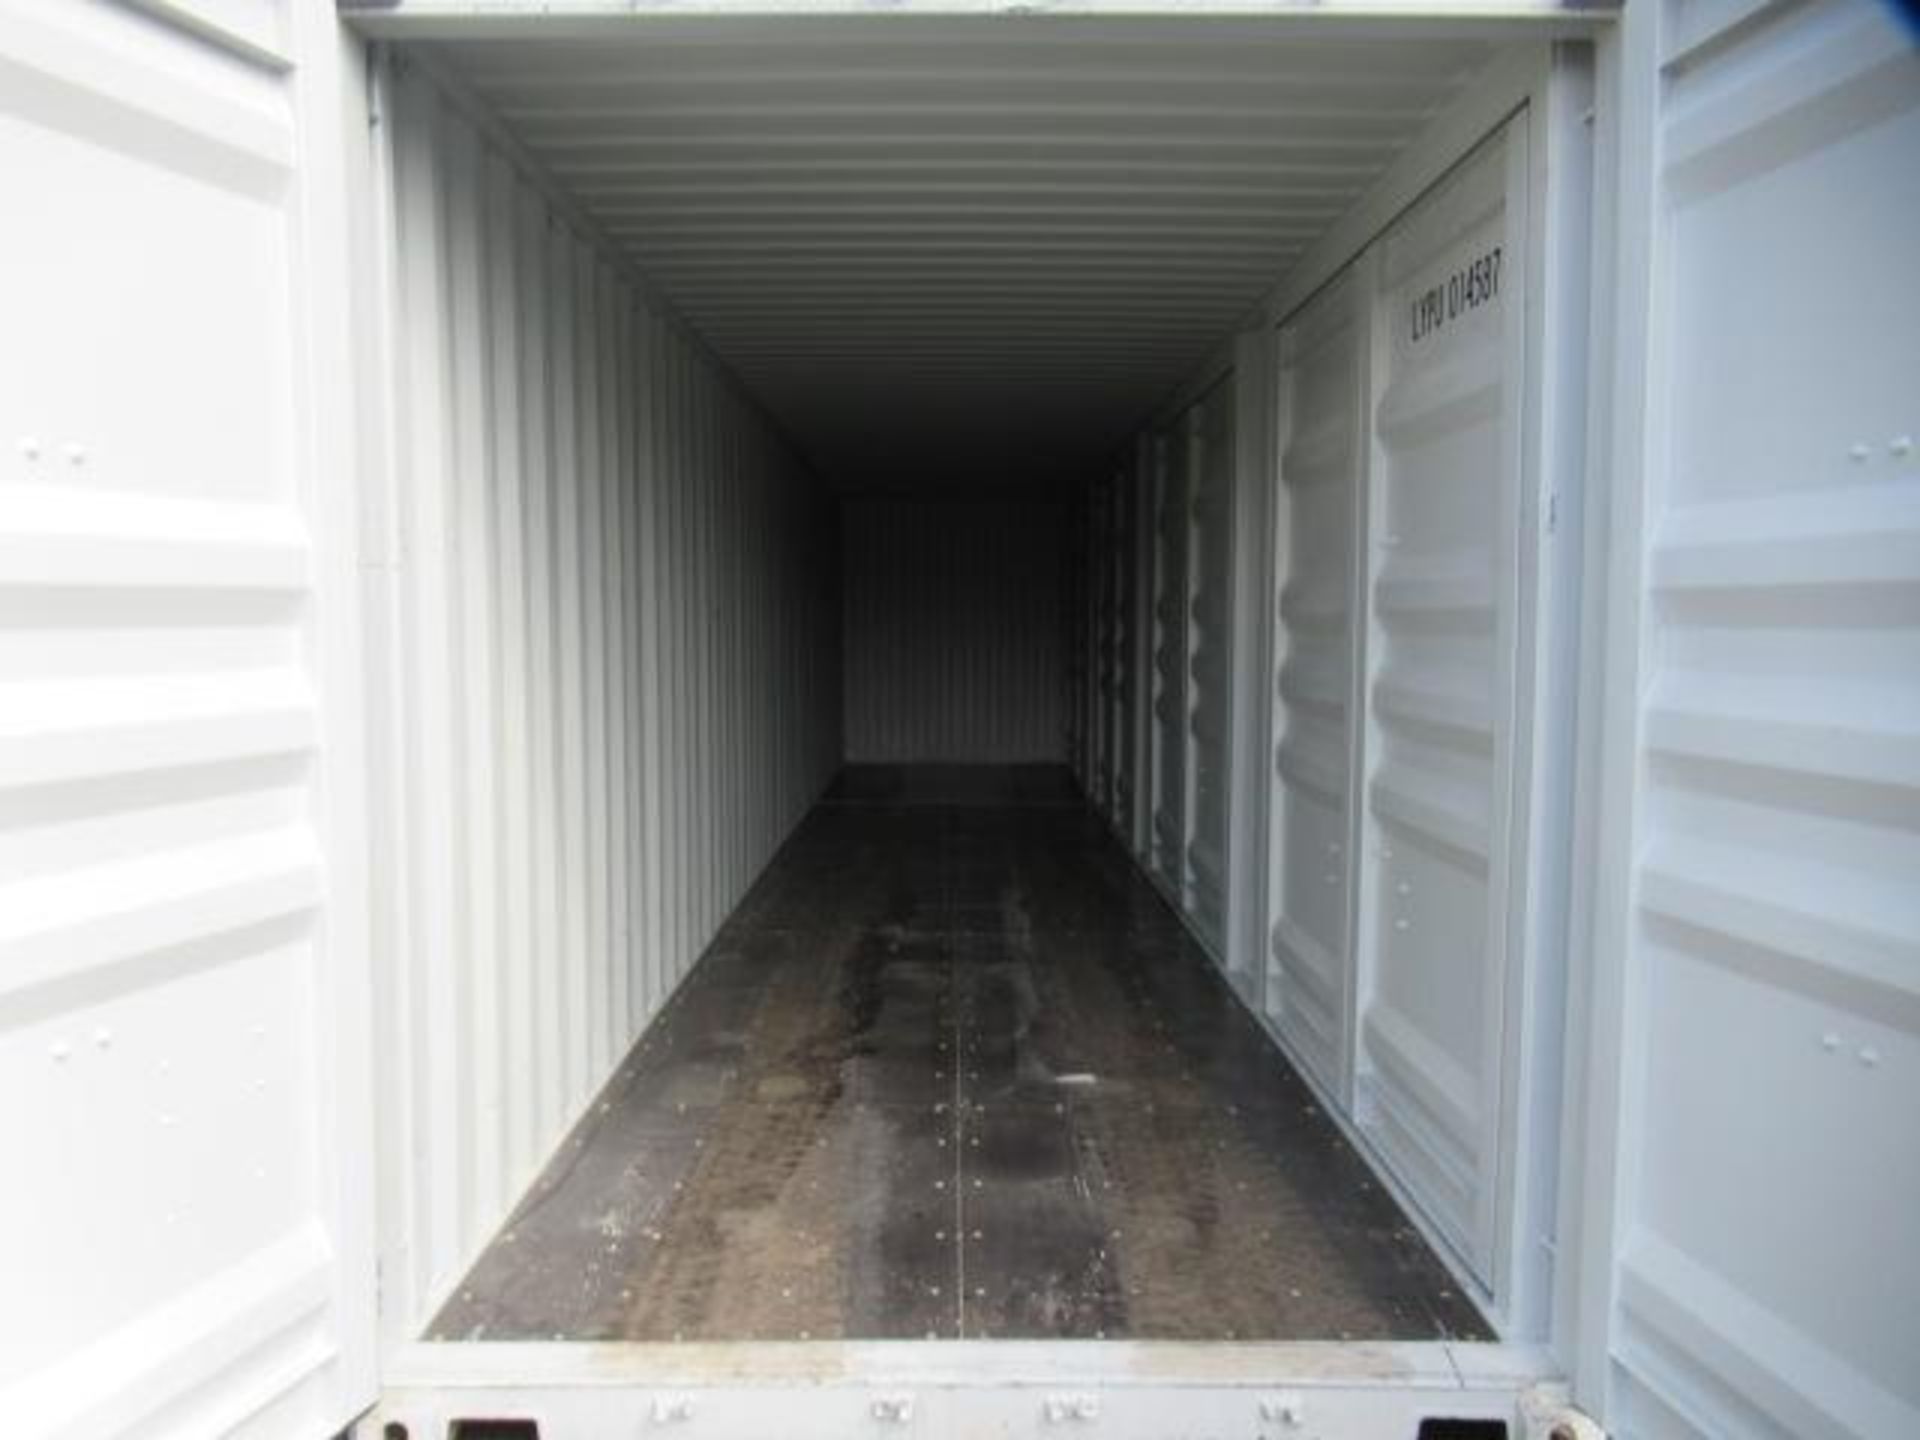 2024 40' HIGH CUBE SHIPPING CONTAINER W/ (4) SIDE DOORS, SER#: LYPU0145873 (UNUSED) - Image 5 of 6